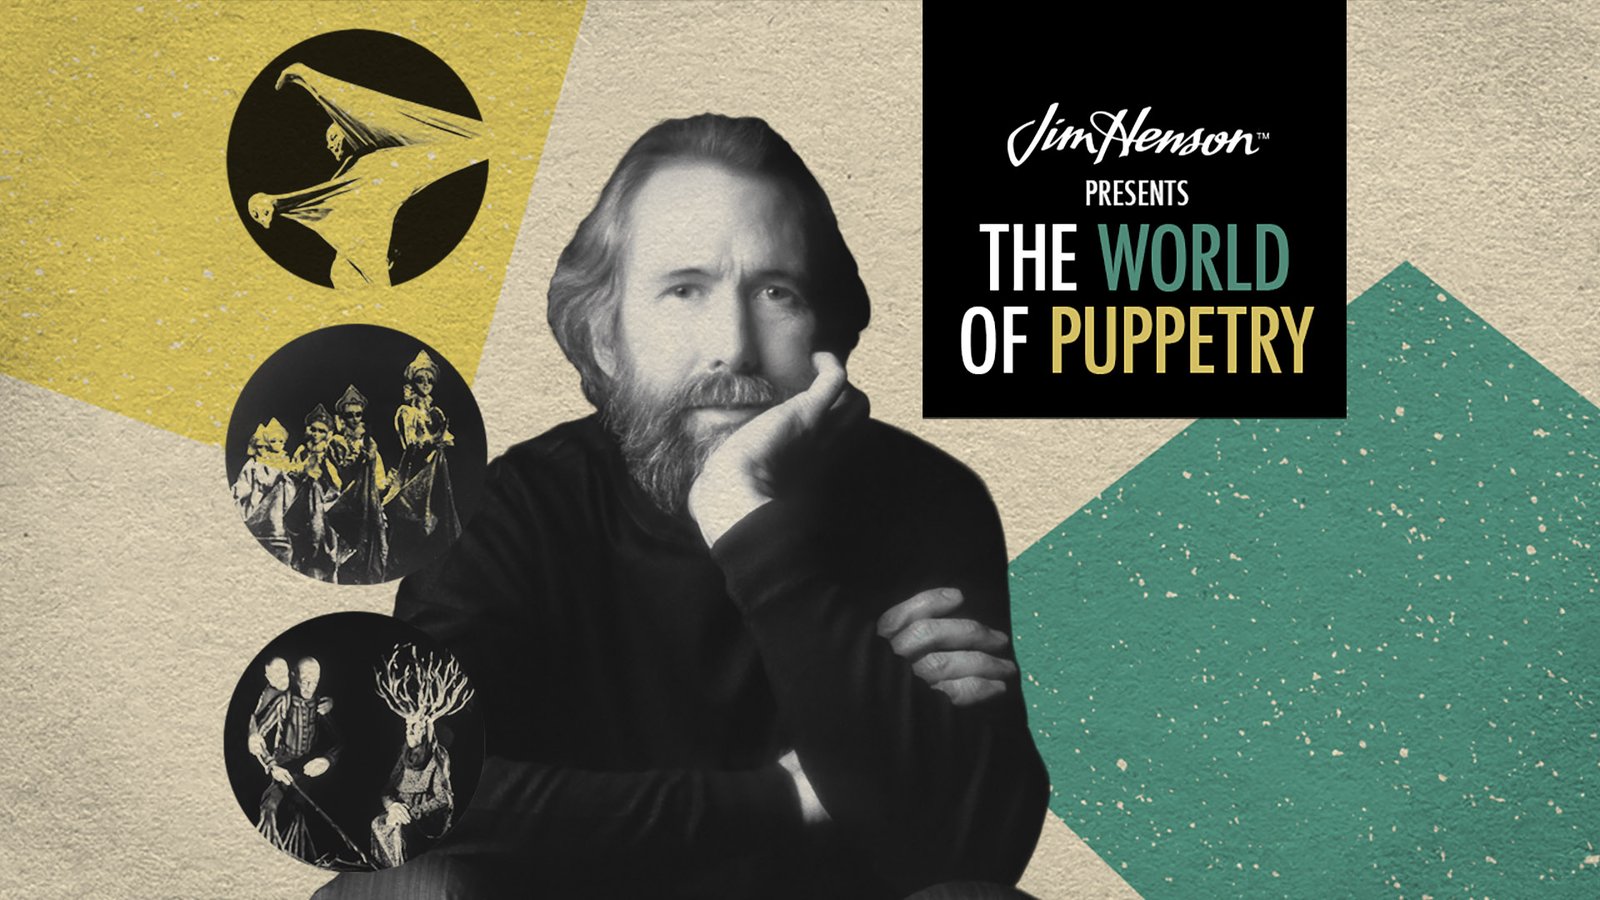 Jim Henson Presents the World of Puppetry